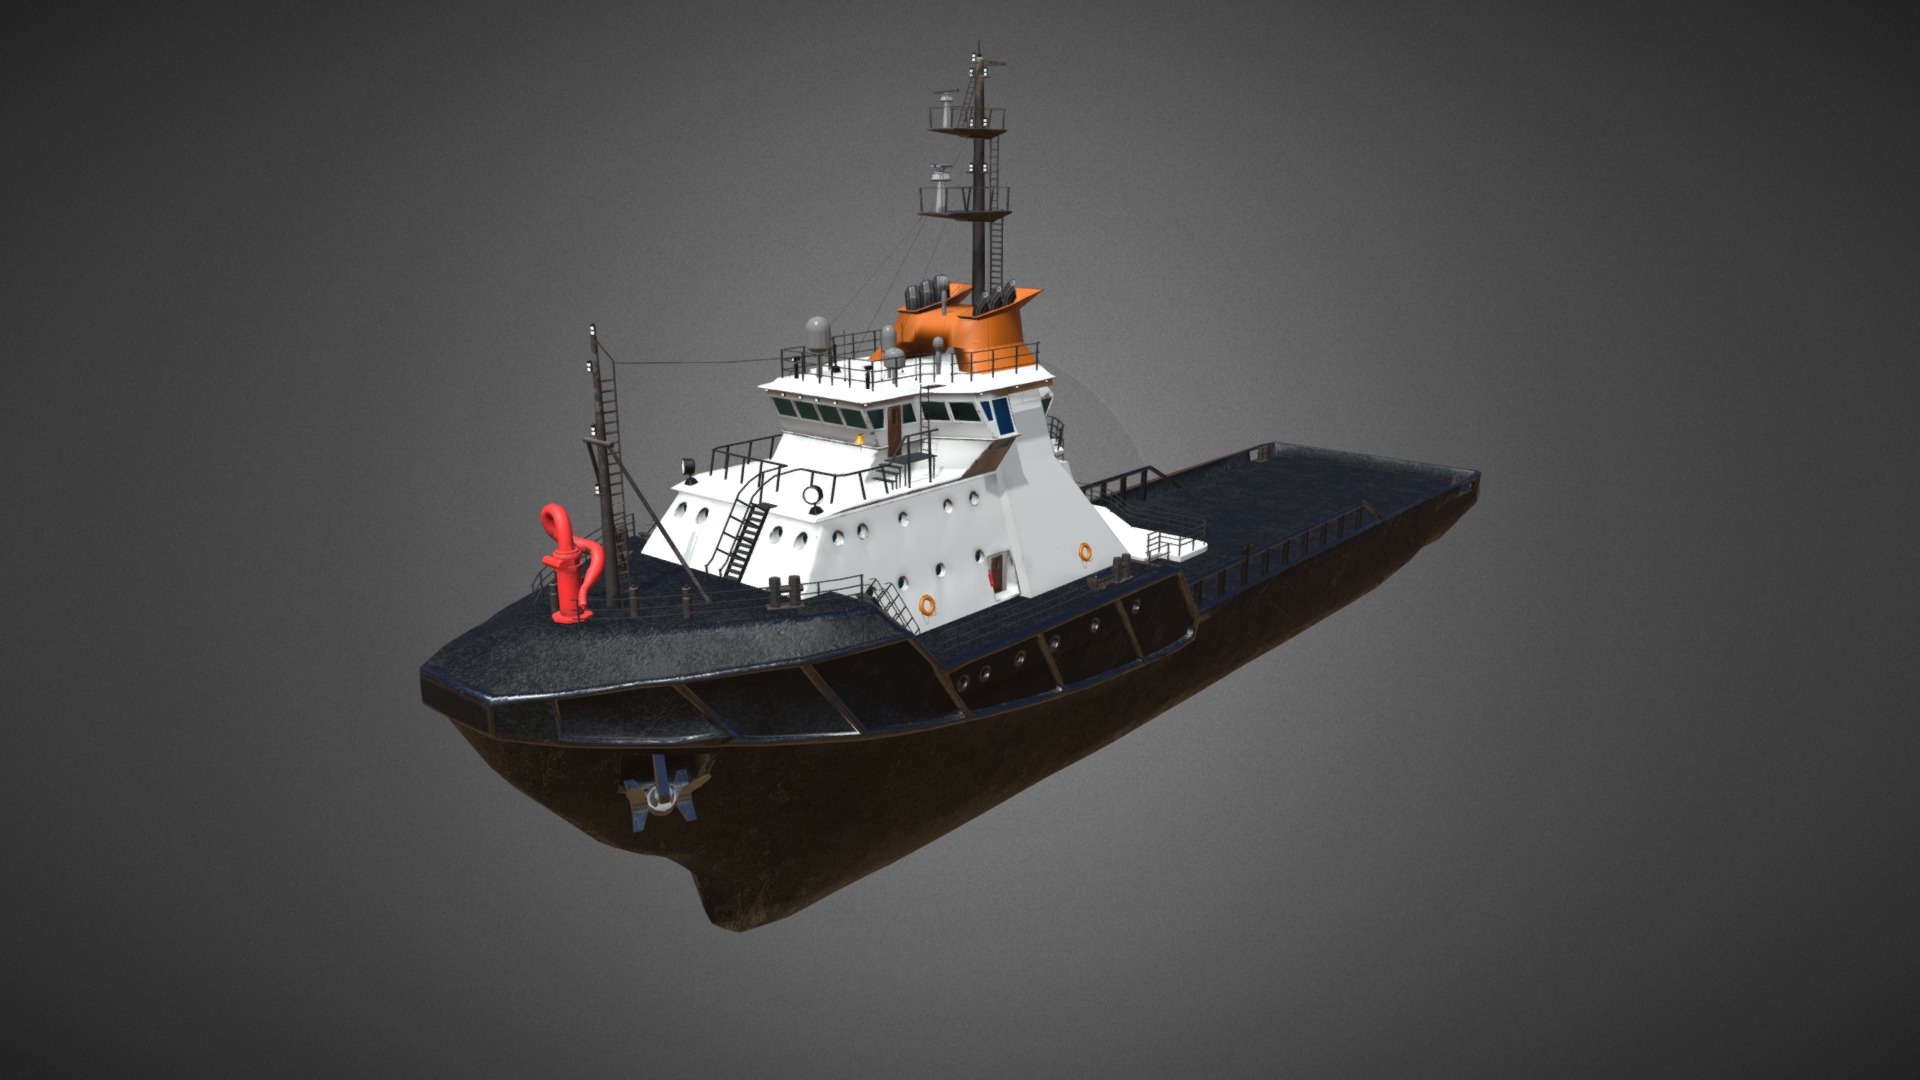 3D model Icebreaker. Offshore ship. - This is a 3D model of the Icebreaker. Offshore ship.. The 3D model is about a large ship in the water.